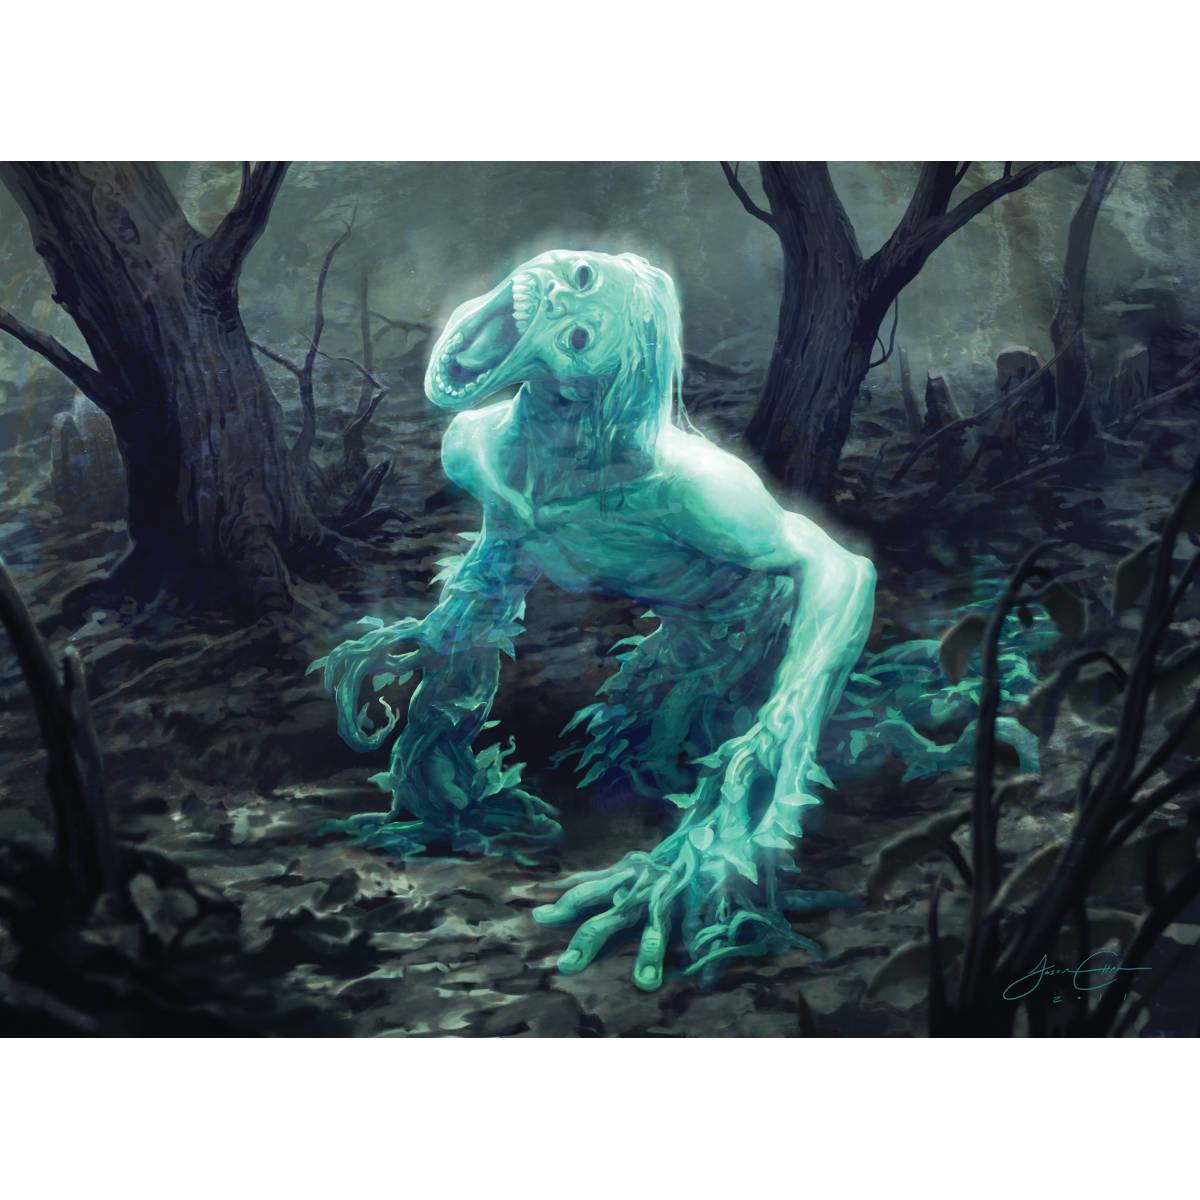 Strangleroot Geist Print - Print - Original Magic Art - Accessories for Magic the Gathering and other card games